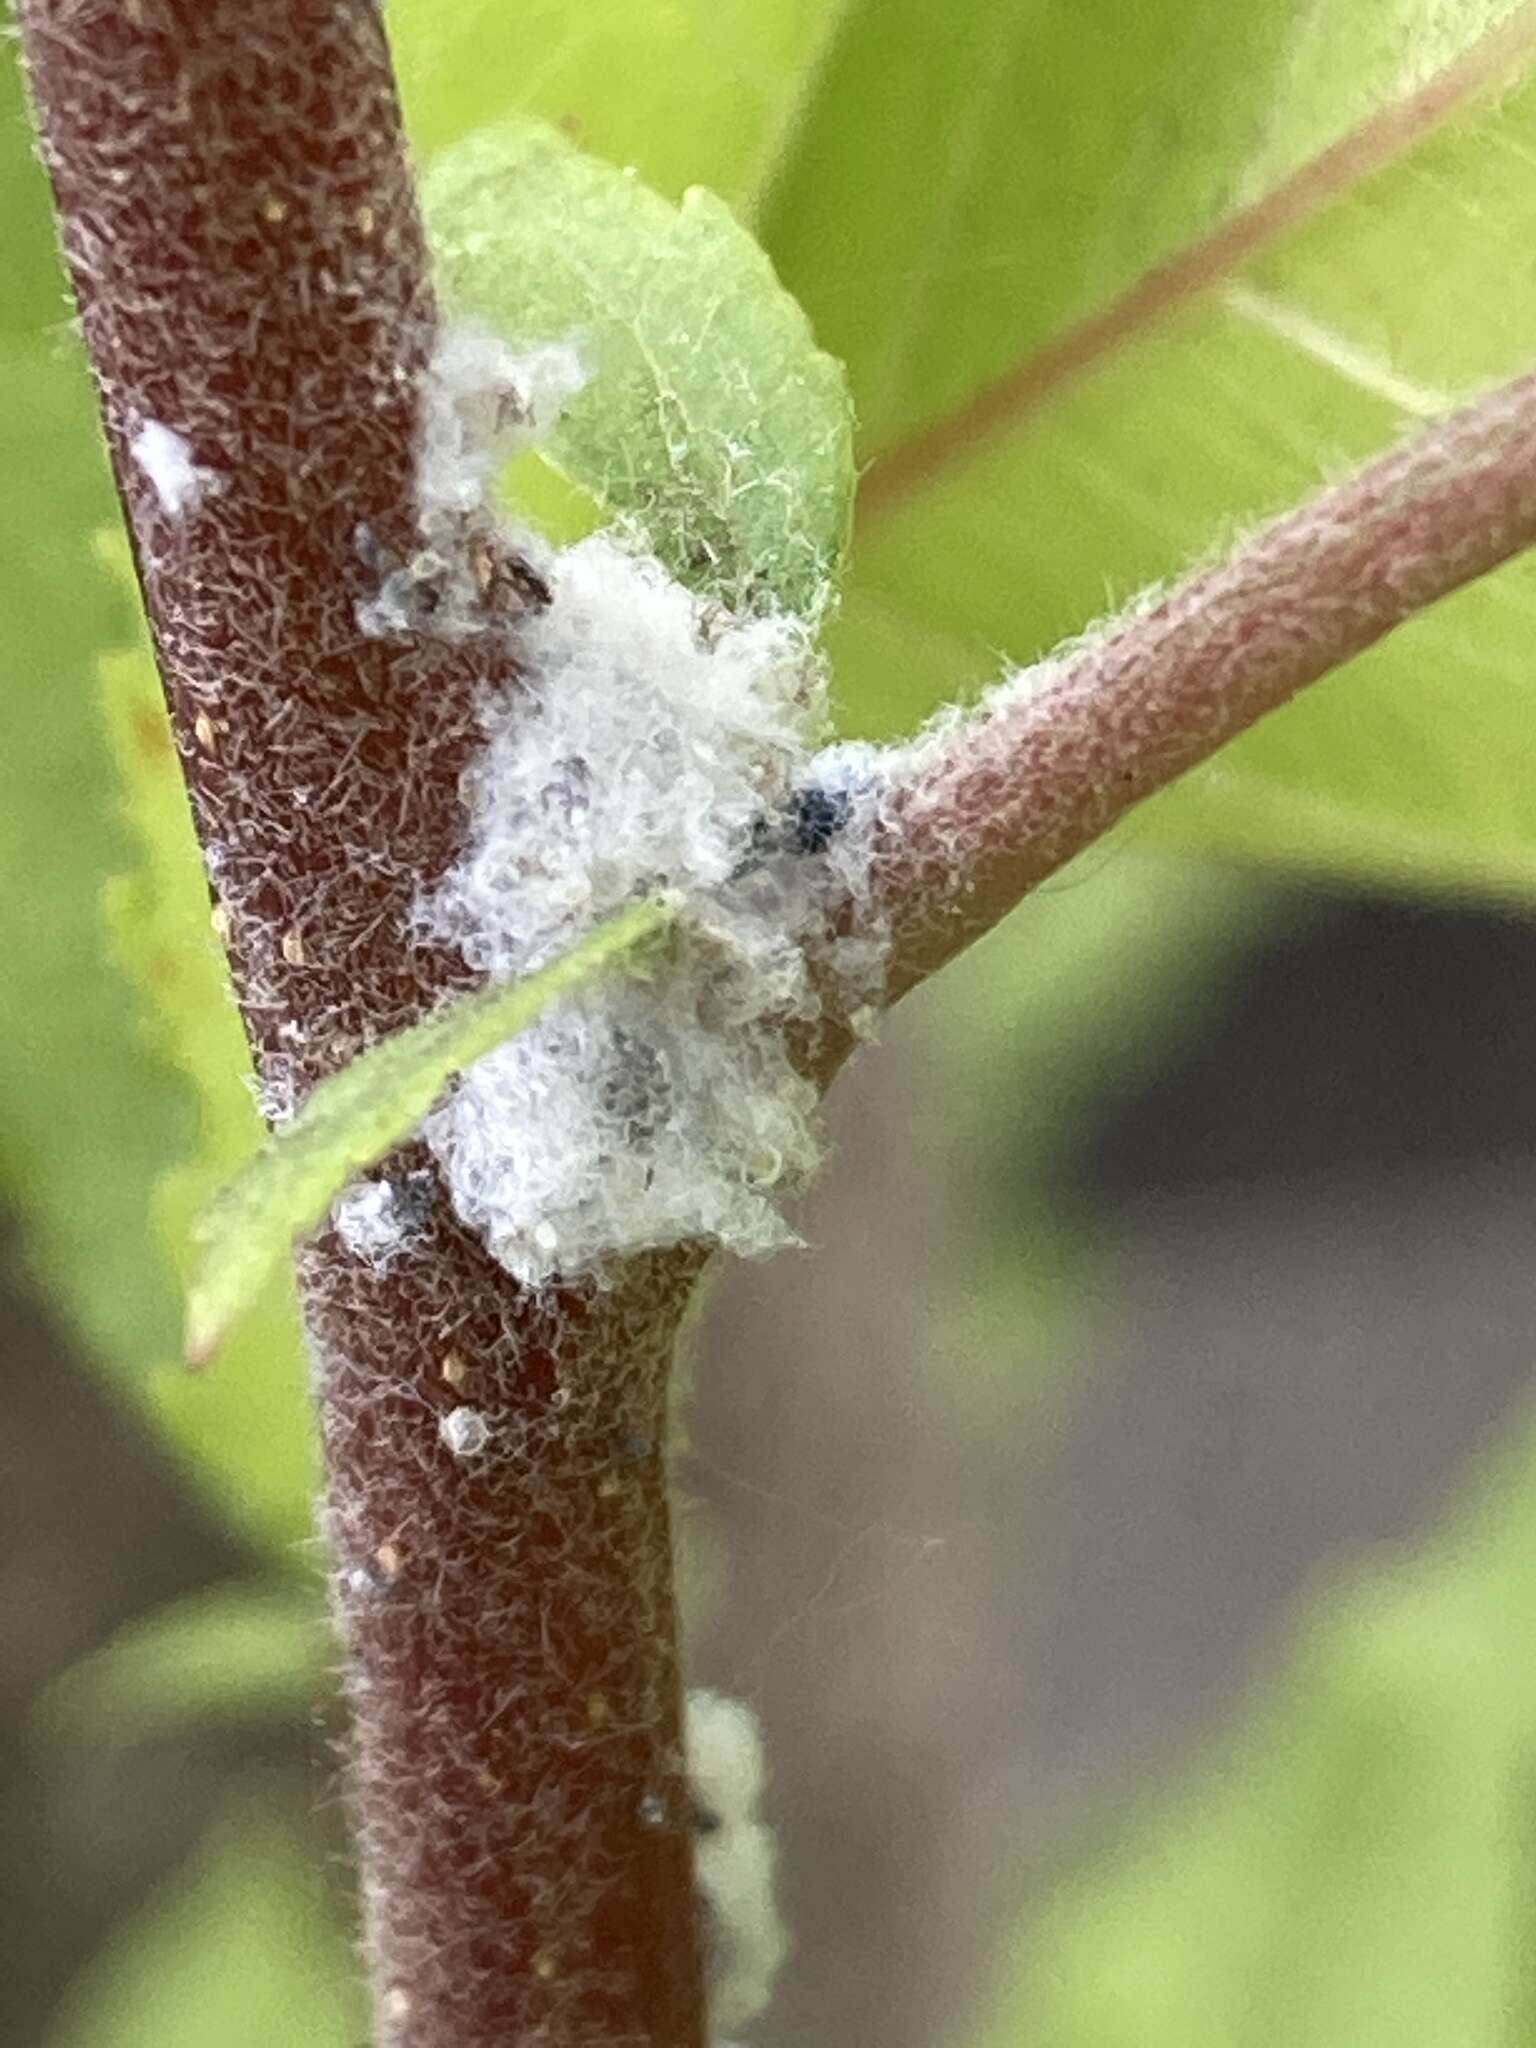 Image of Woolly Apple Aphid